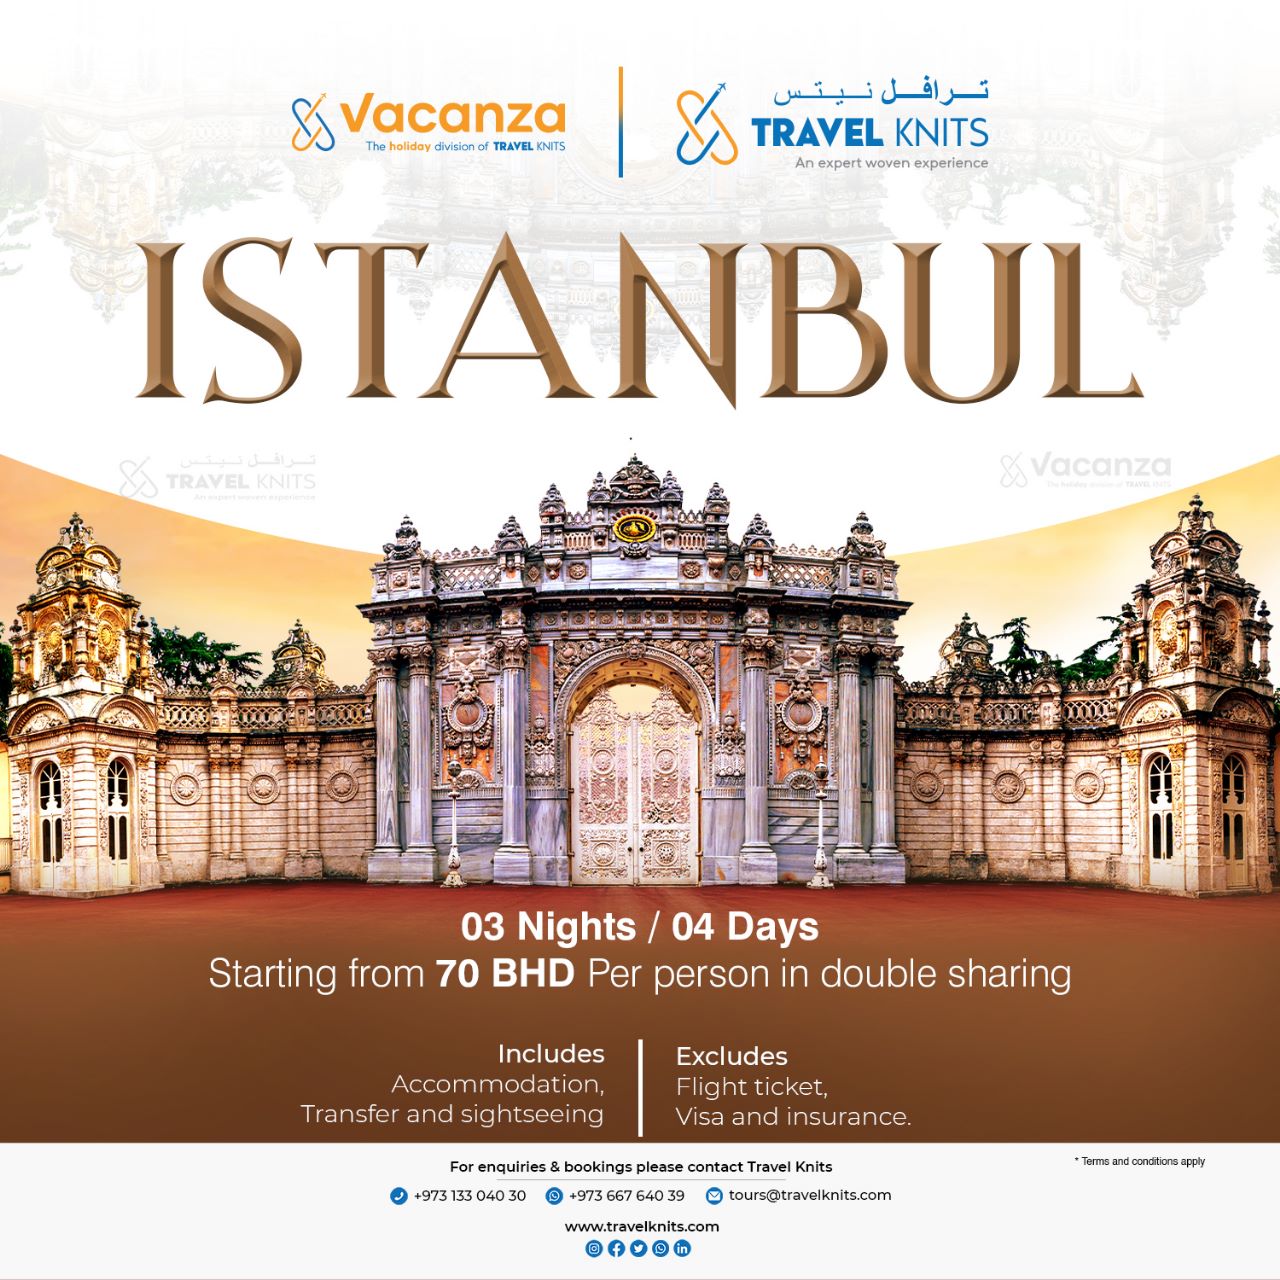 Istanbul |TurkeyTour Packages - Book honeymoon ,family,adventure tour packages to Turkey|Travel Knits												